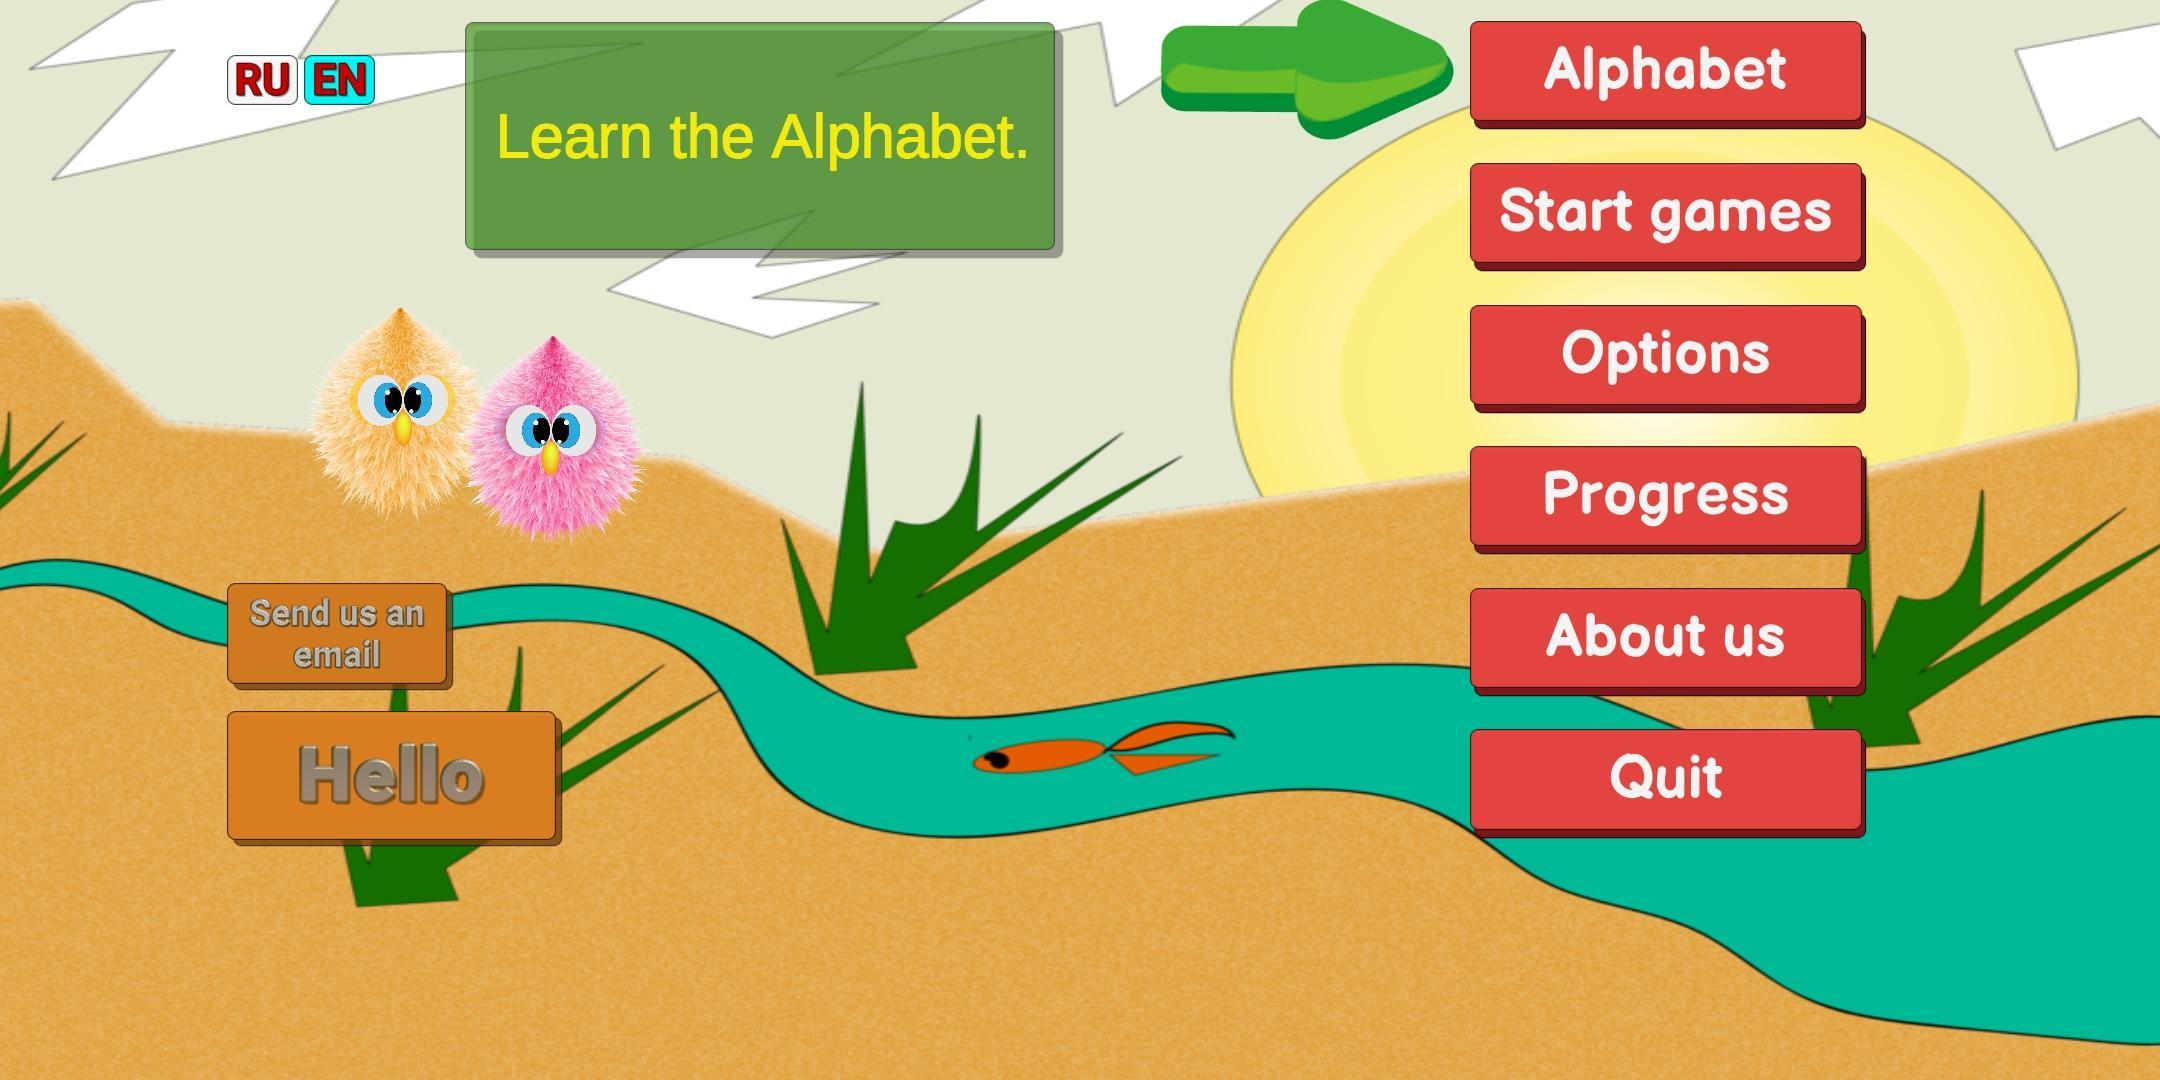 Russian alphabet learning with letter games 1.9 Screenshot 8